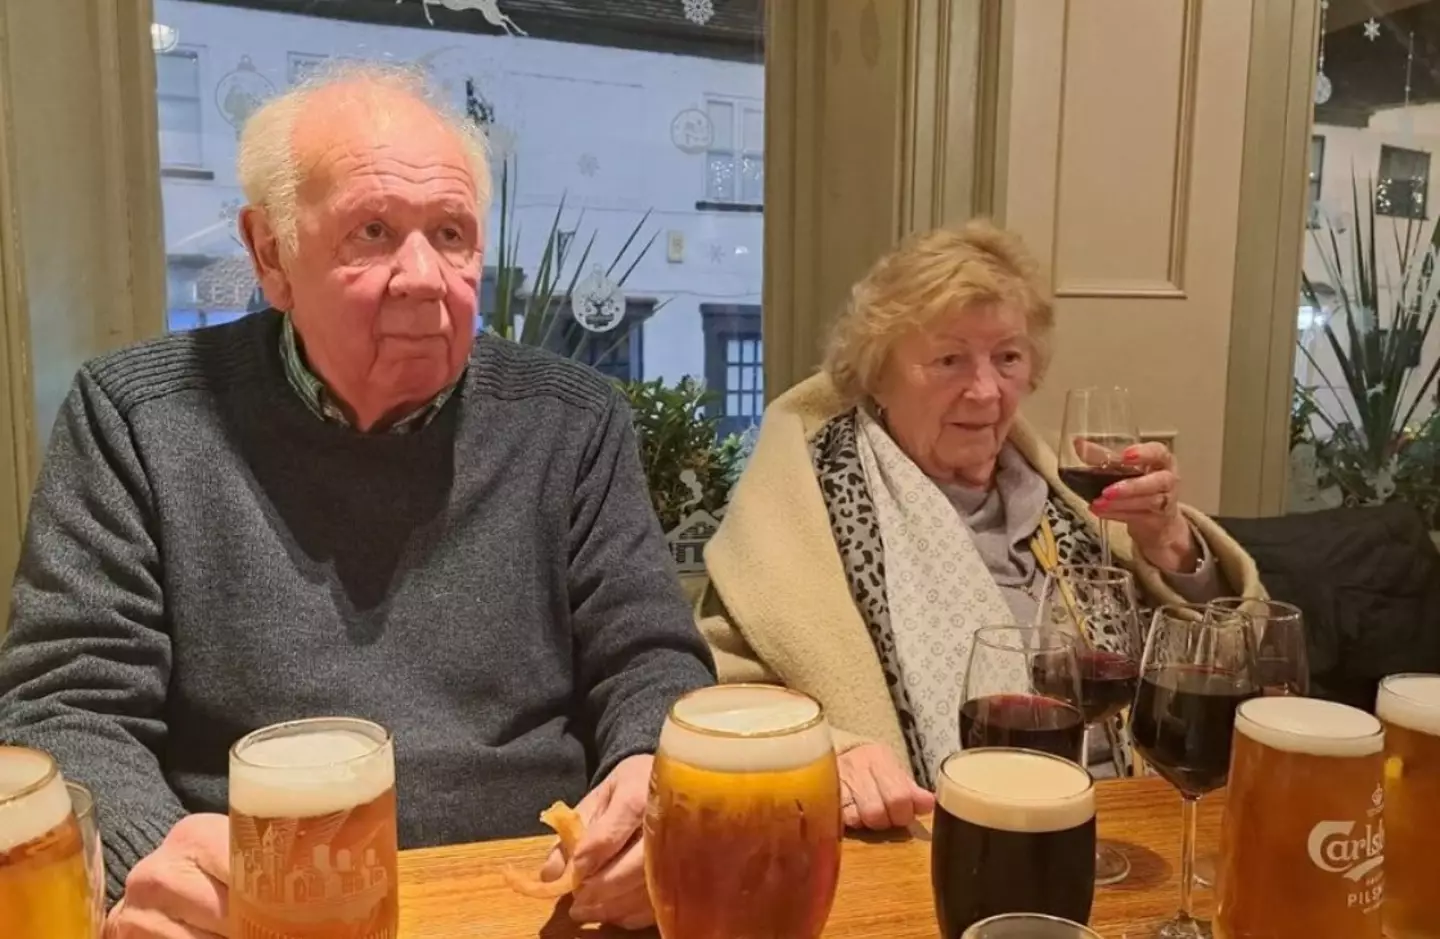 Mark said he wanted 'nothing crazy', so the internet bought his grandad eight pints and his nana five glasses of wine.